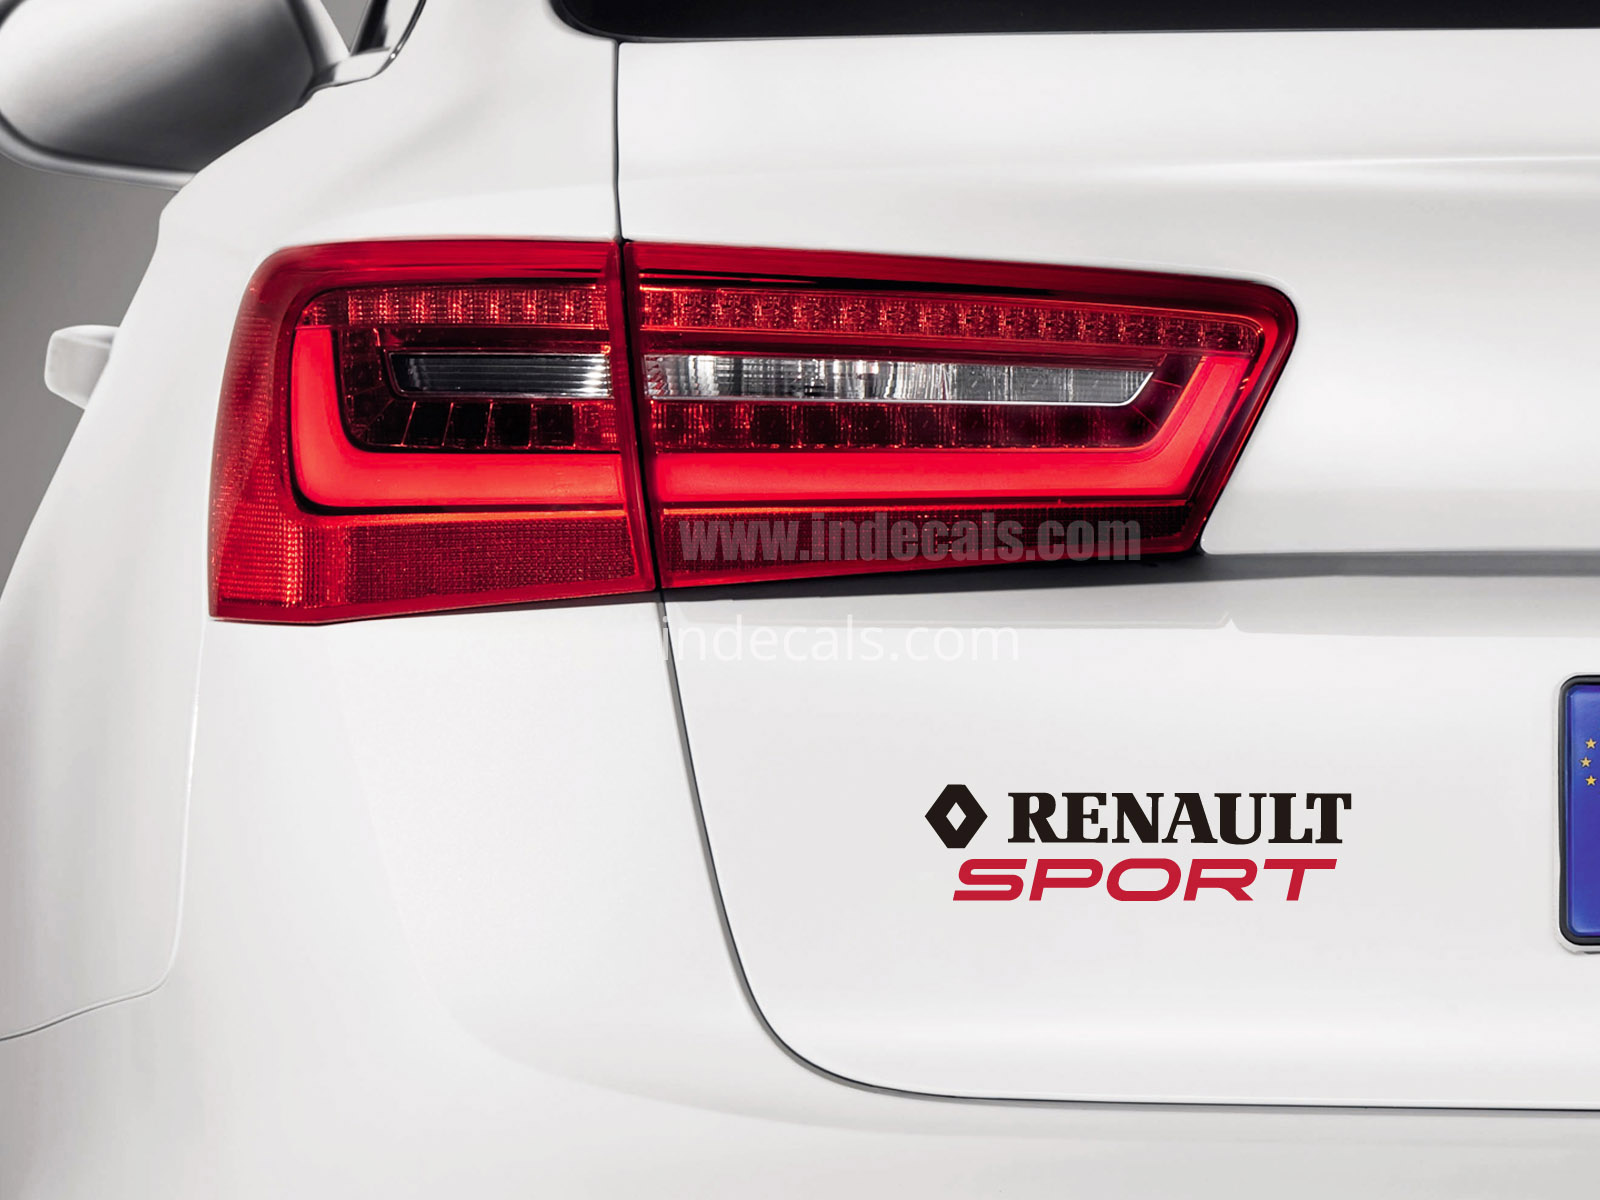 1 x Renault Sports Sticker for Trunk - Black & Red